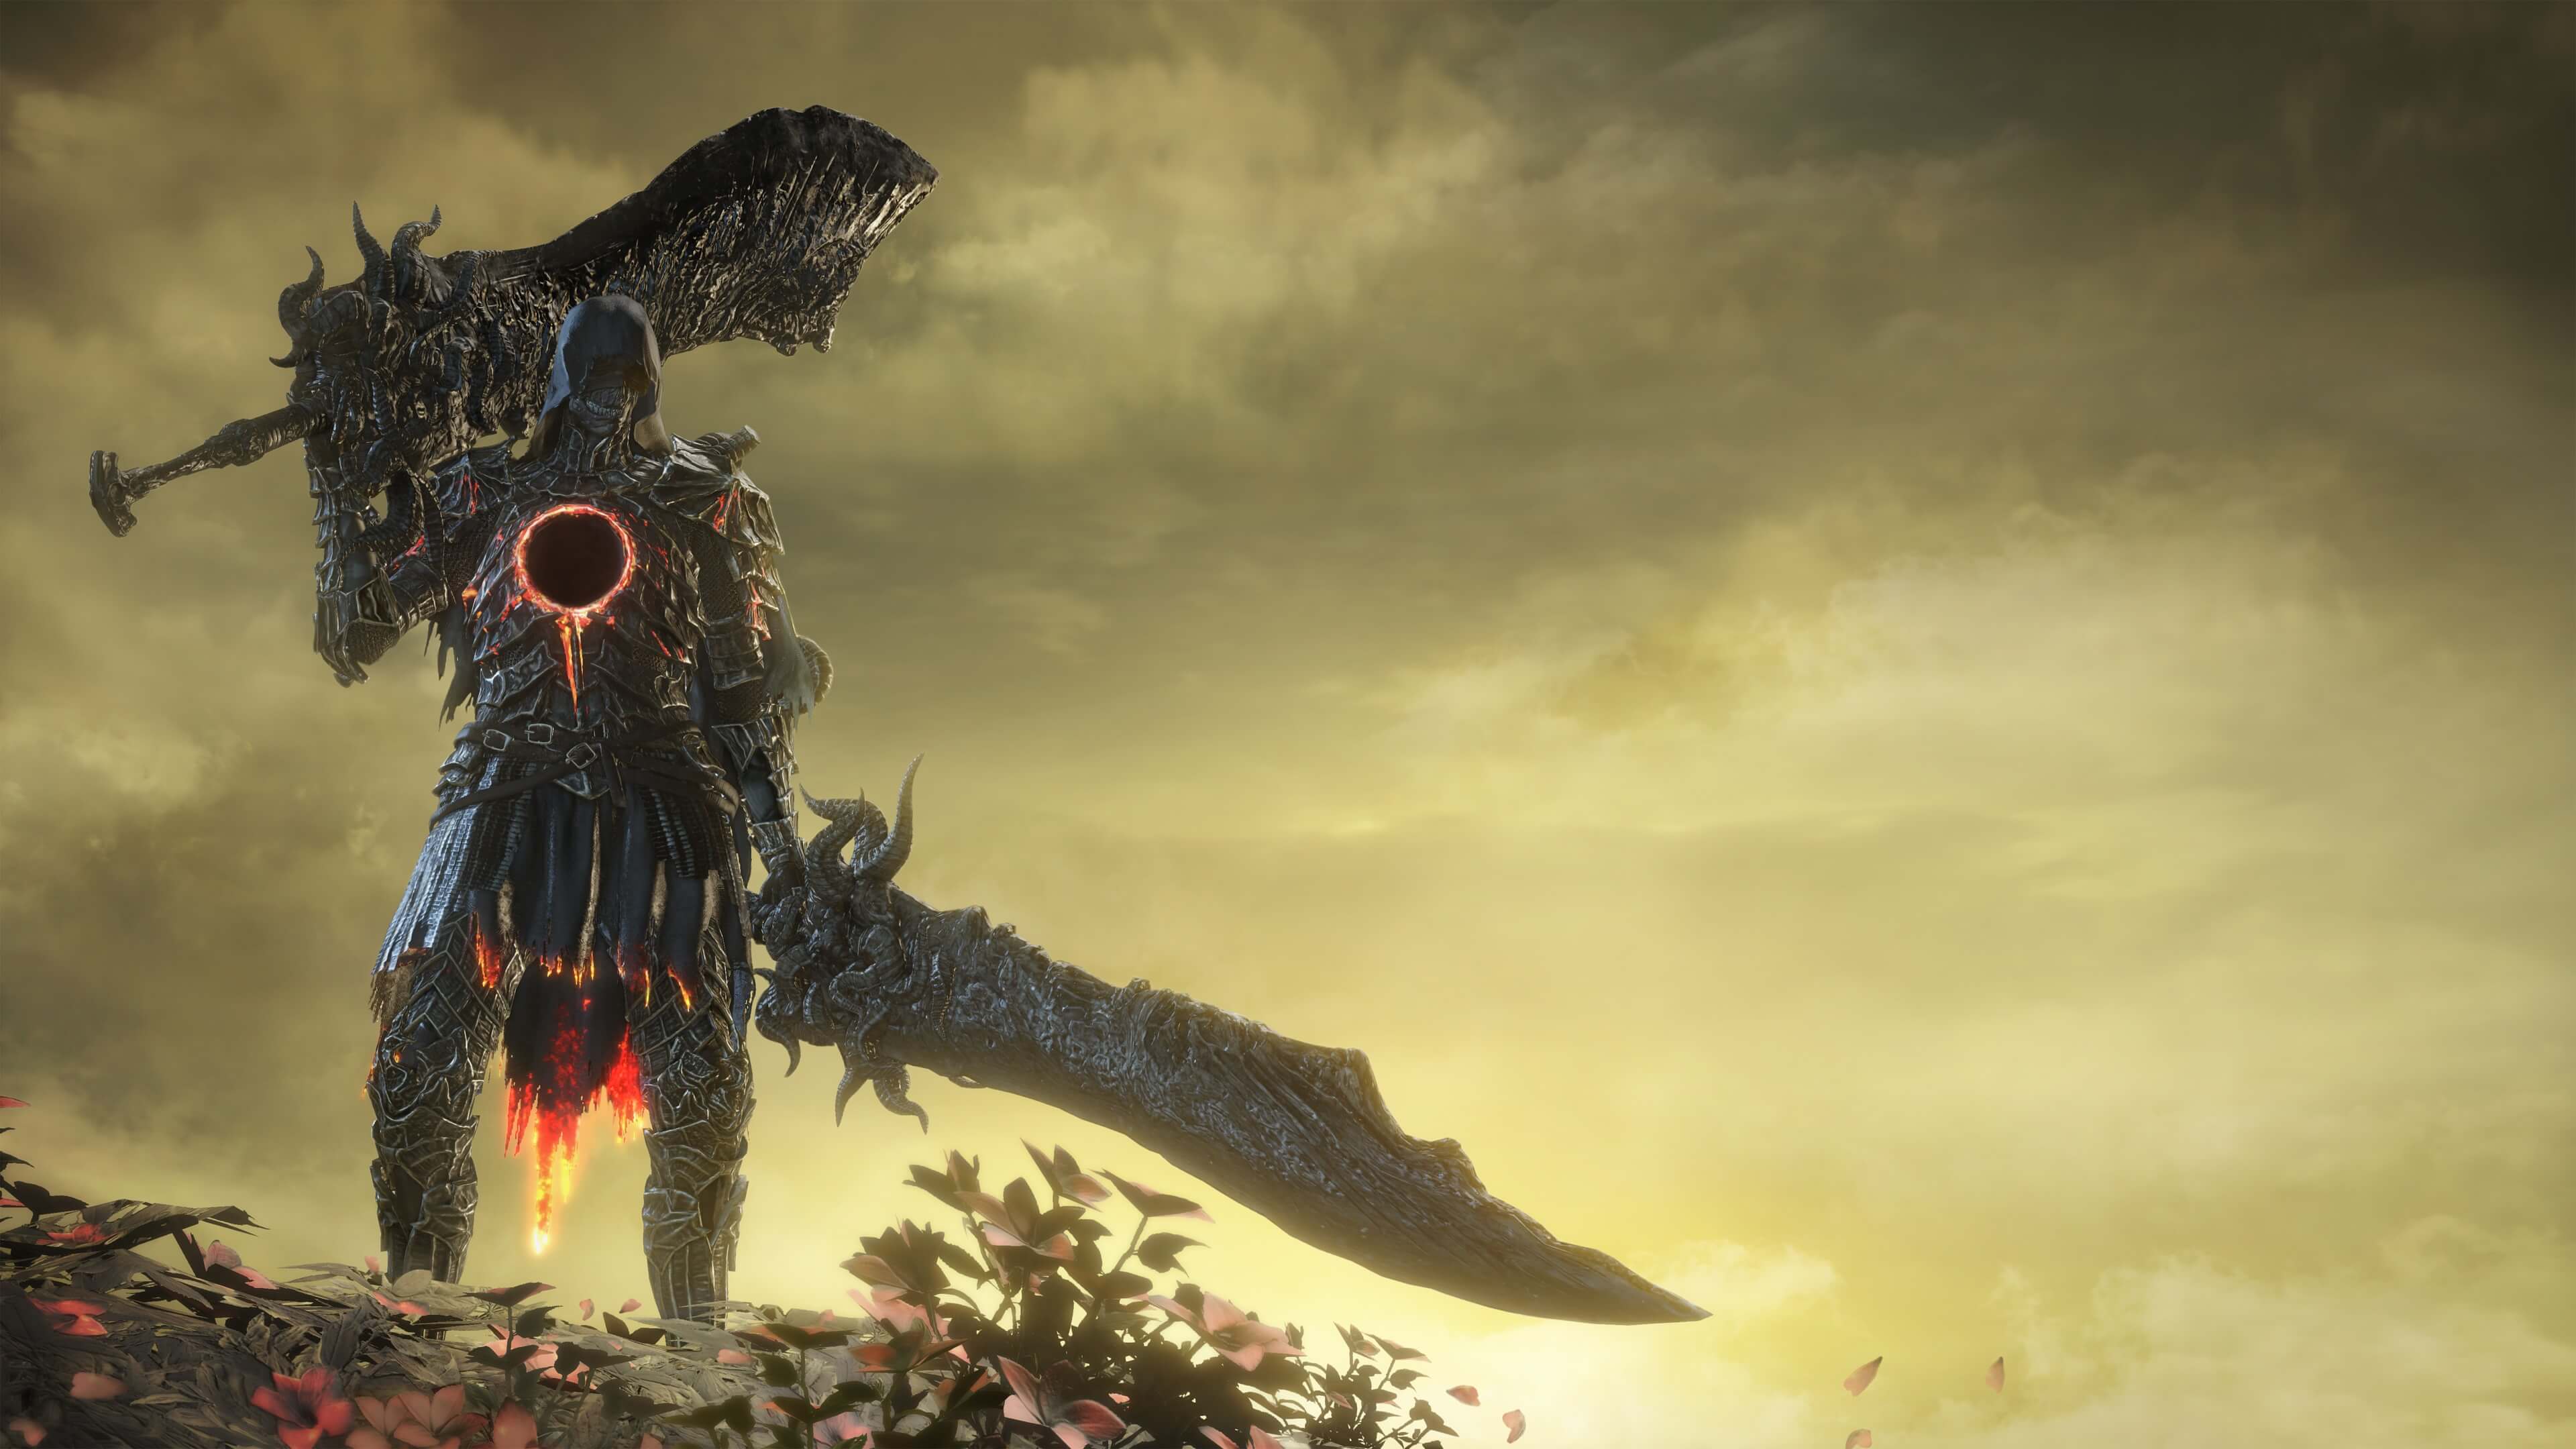 Dark Souls 3 The Ringed City Recensione PCGaming.it